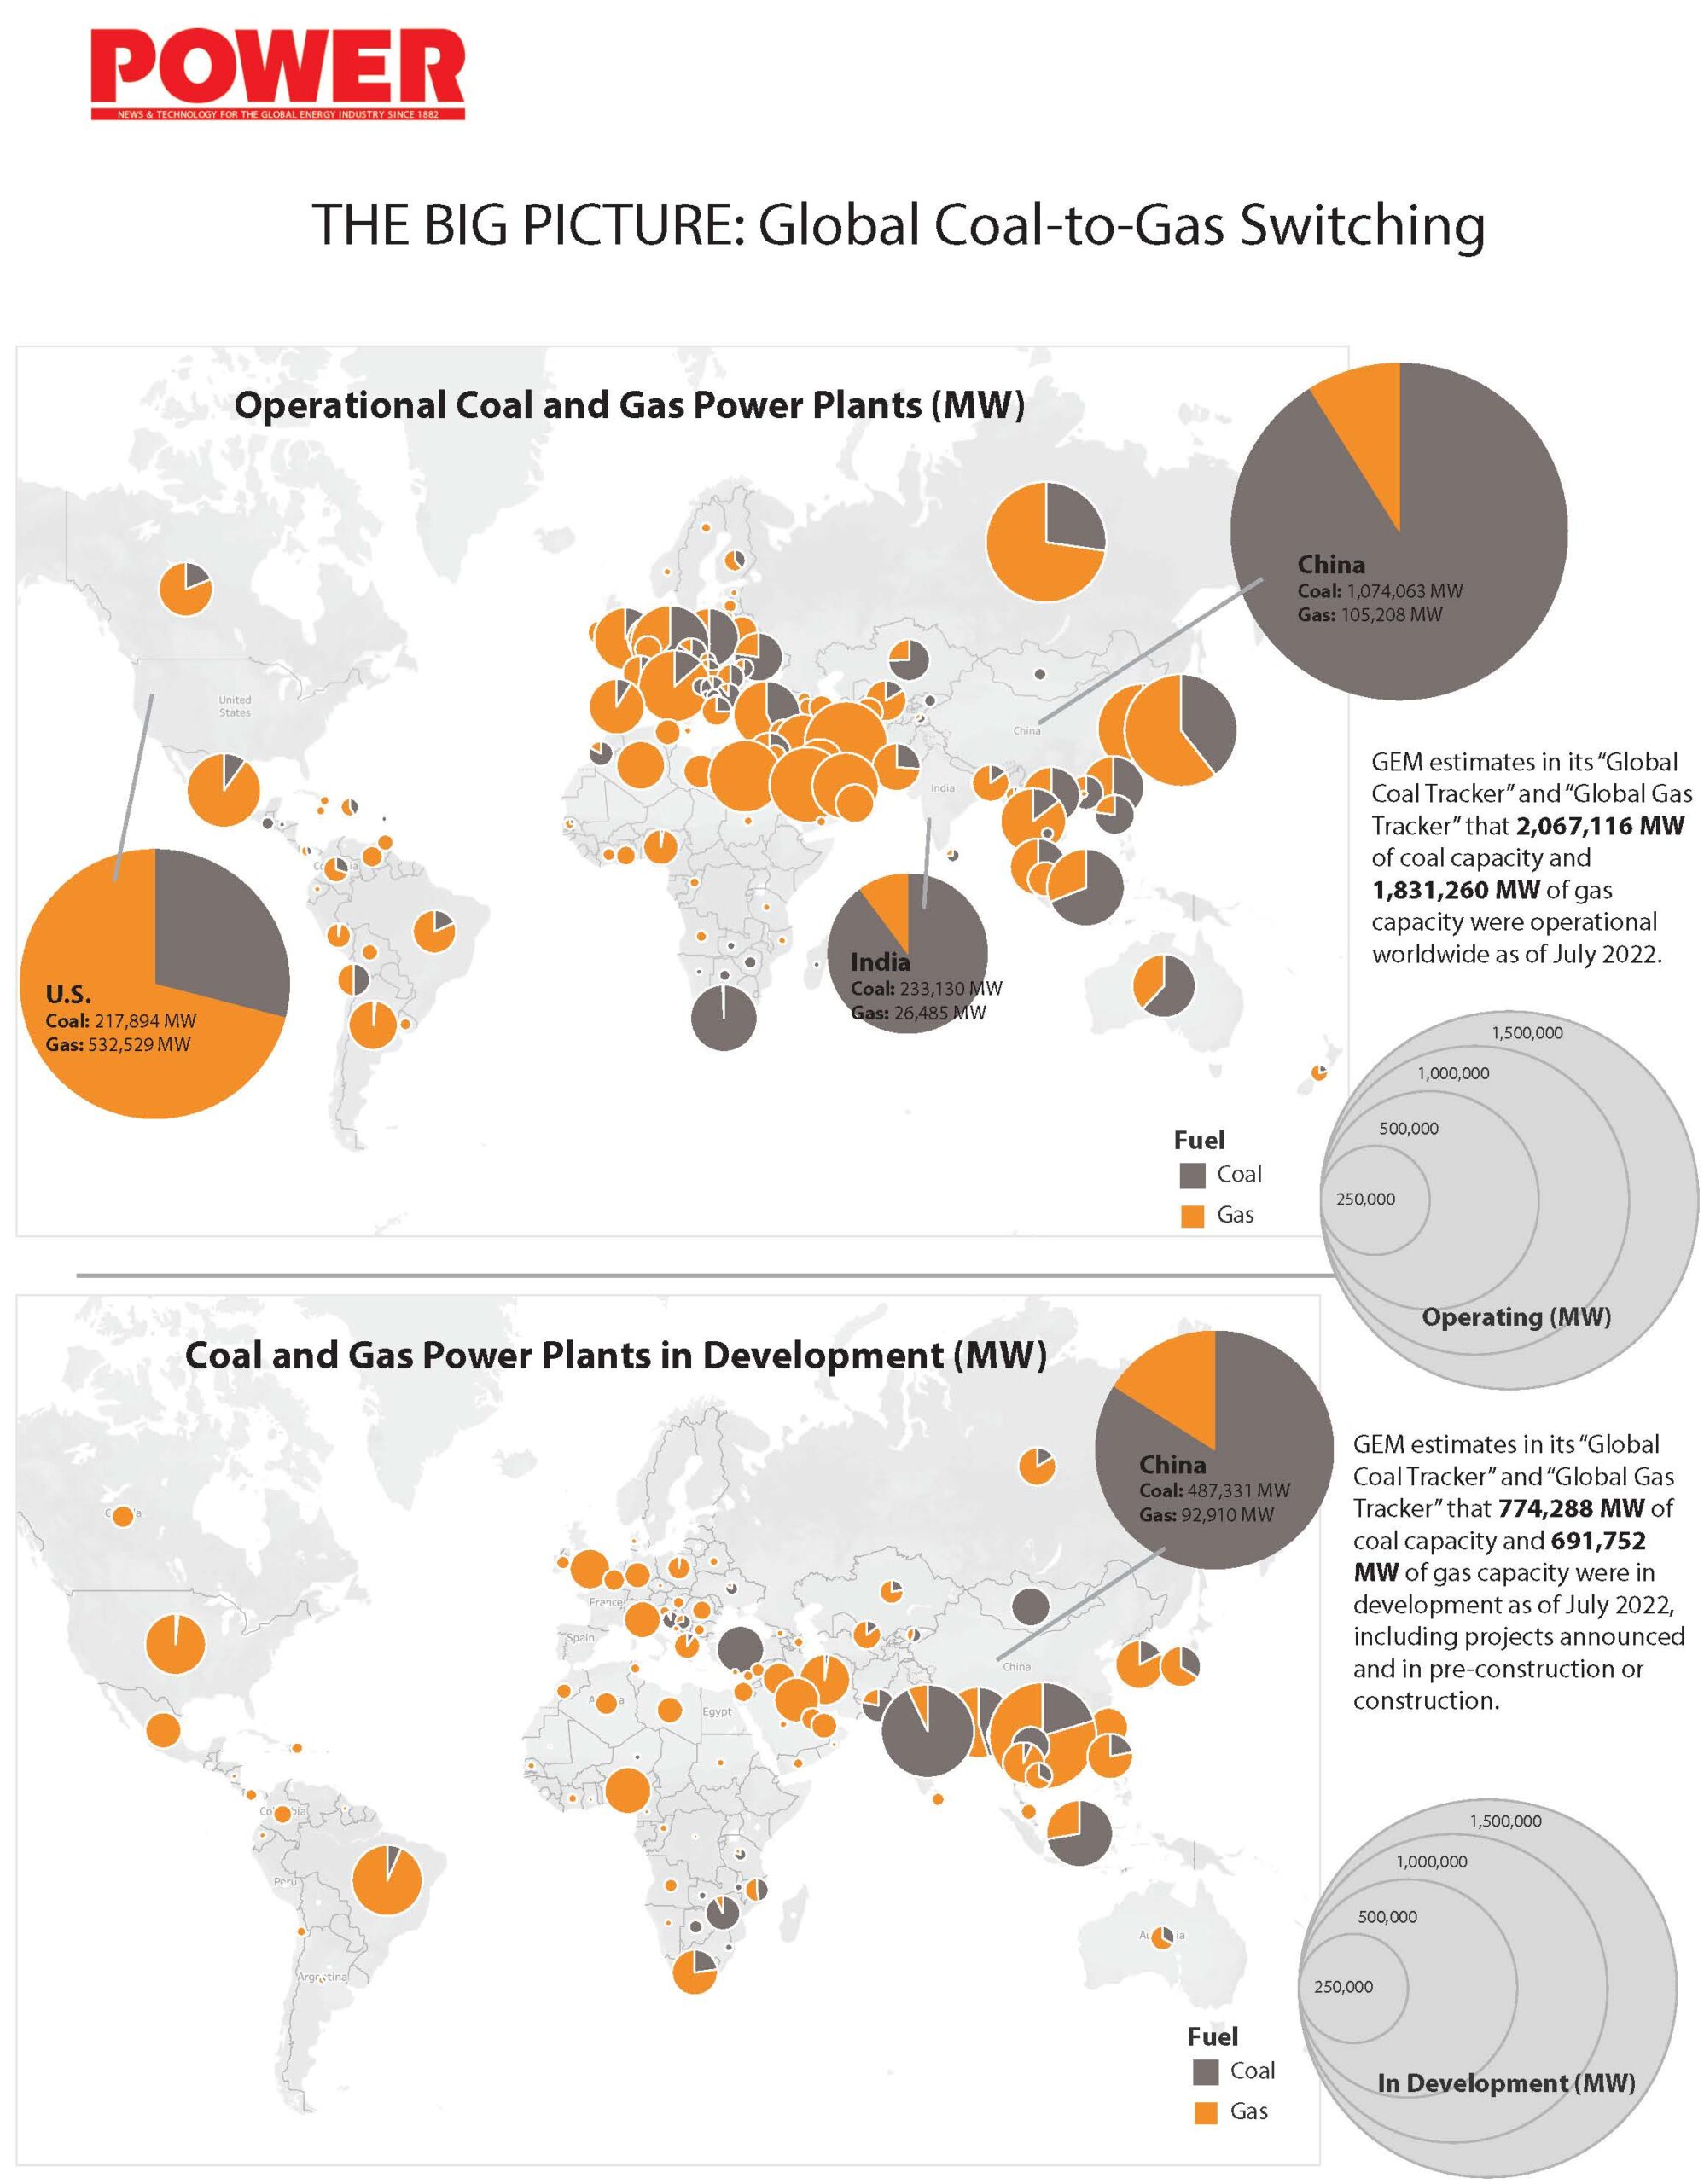 THE BIG PICTURE: Global Coal-to-Gas Switching